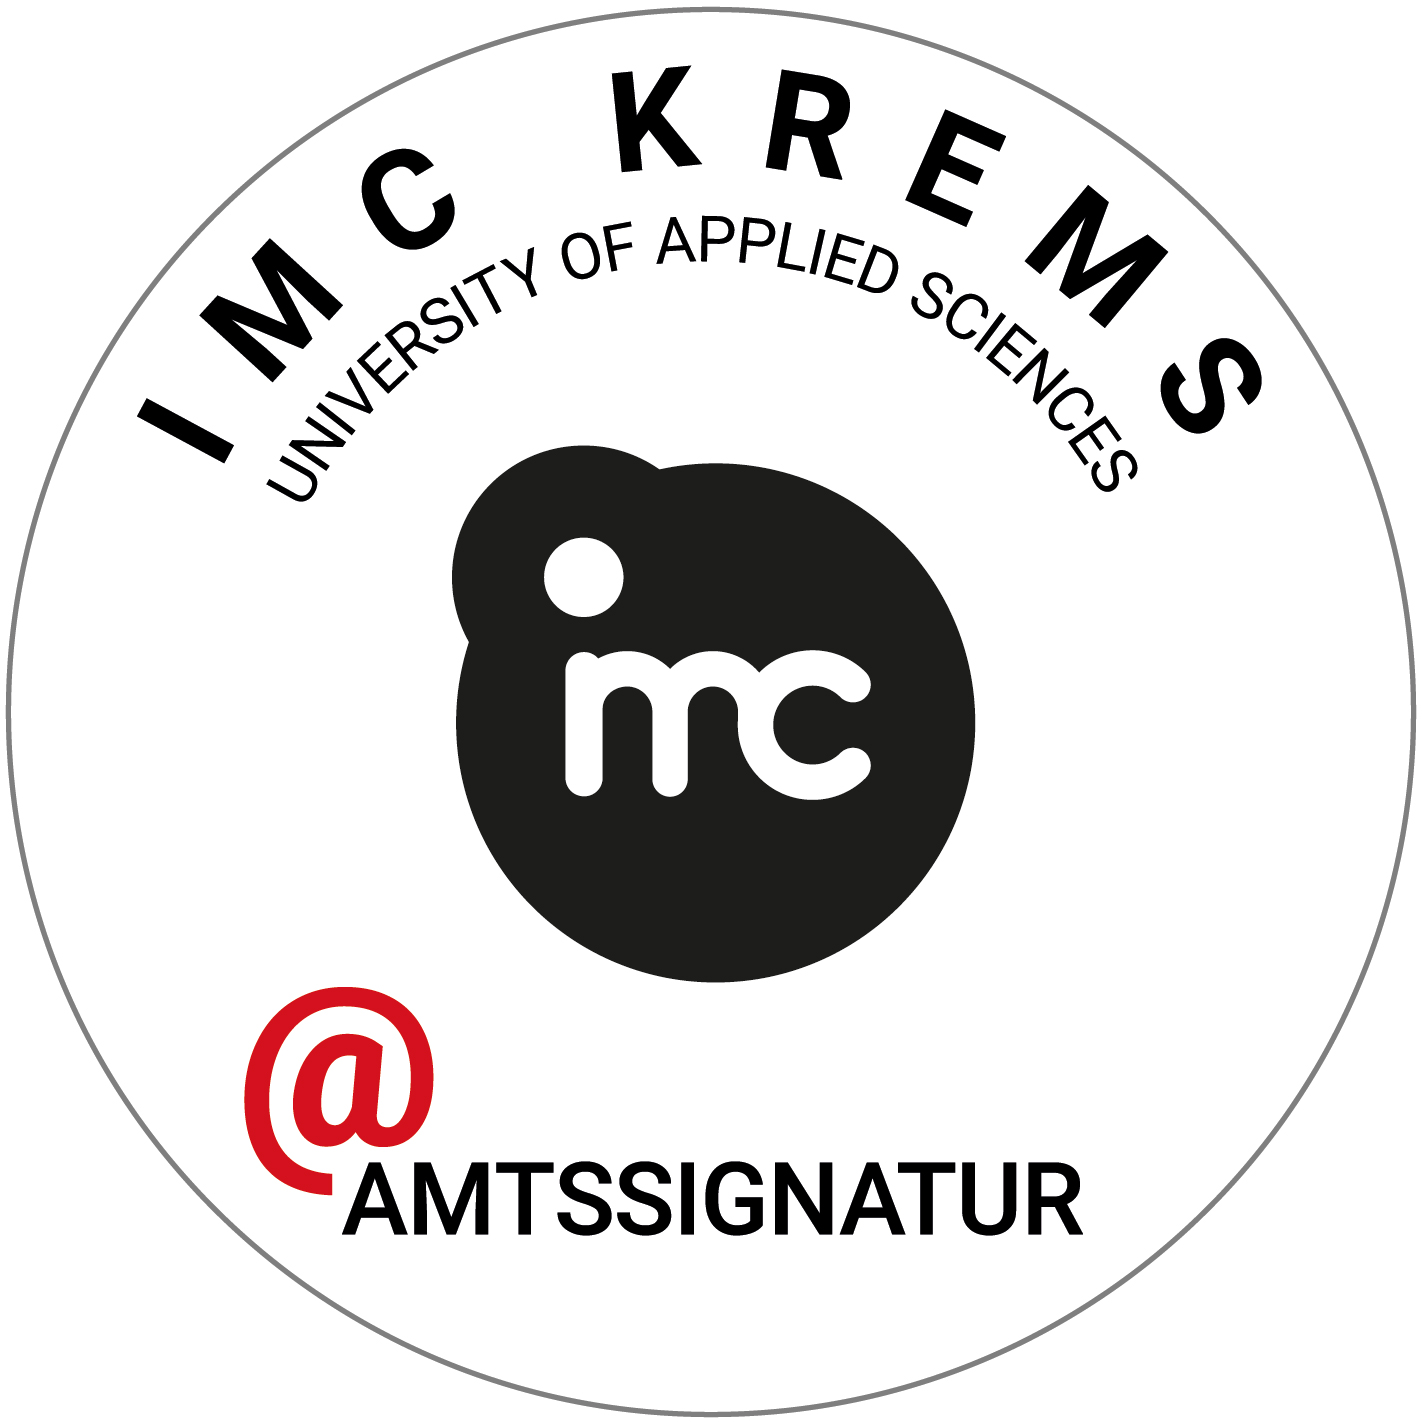 Official electronic signiture IMC Krems